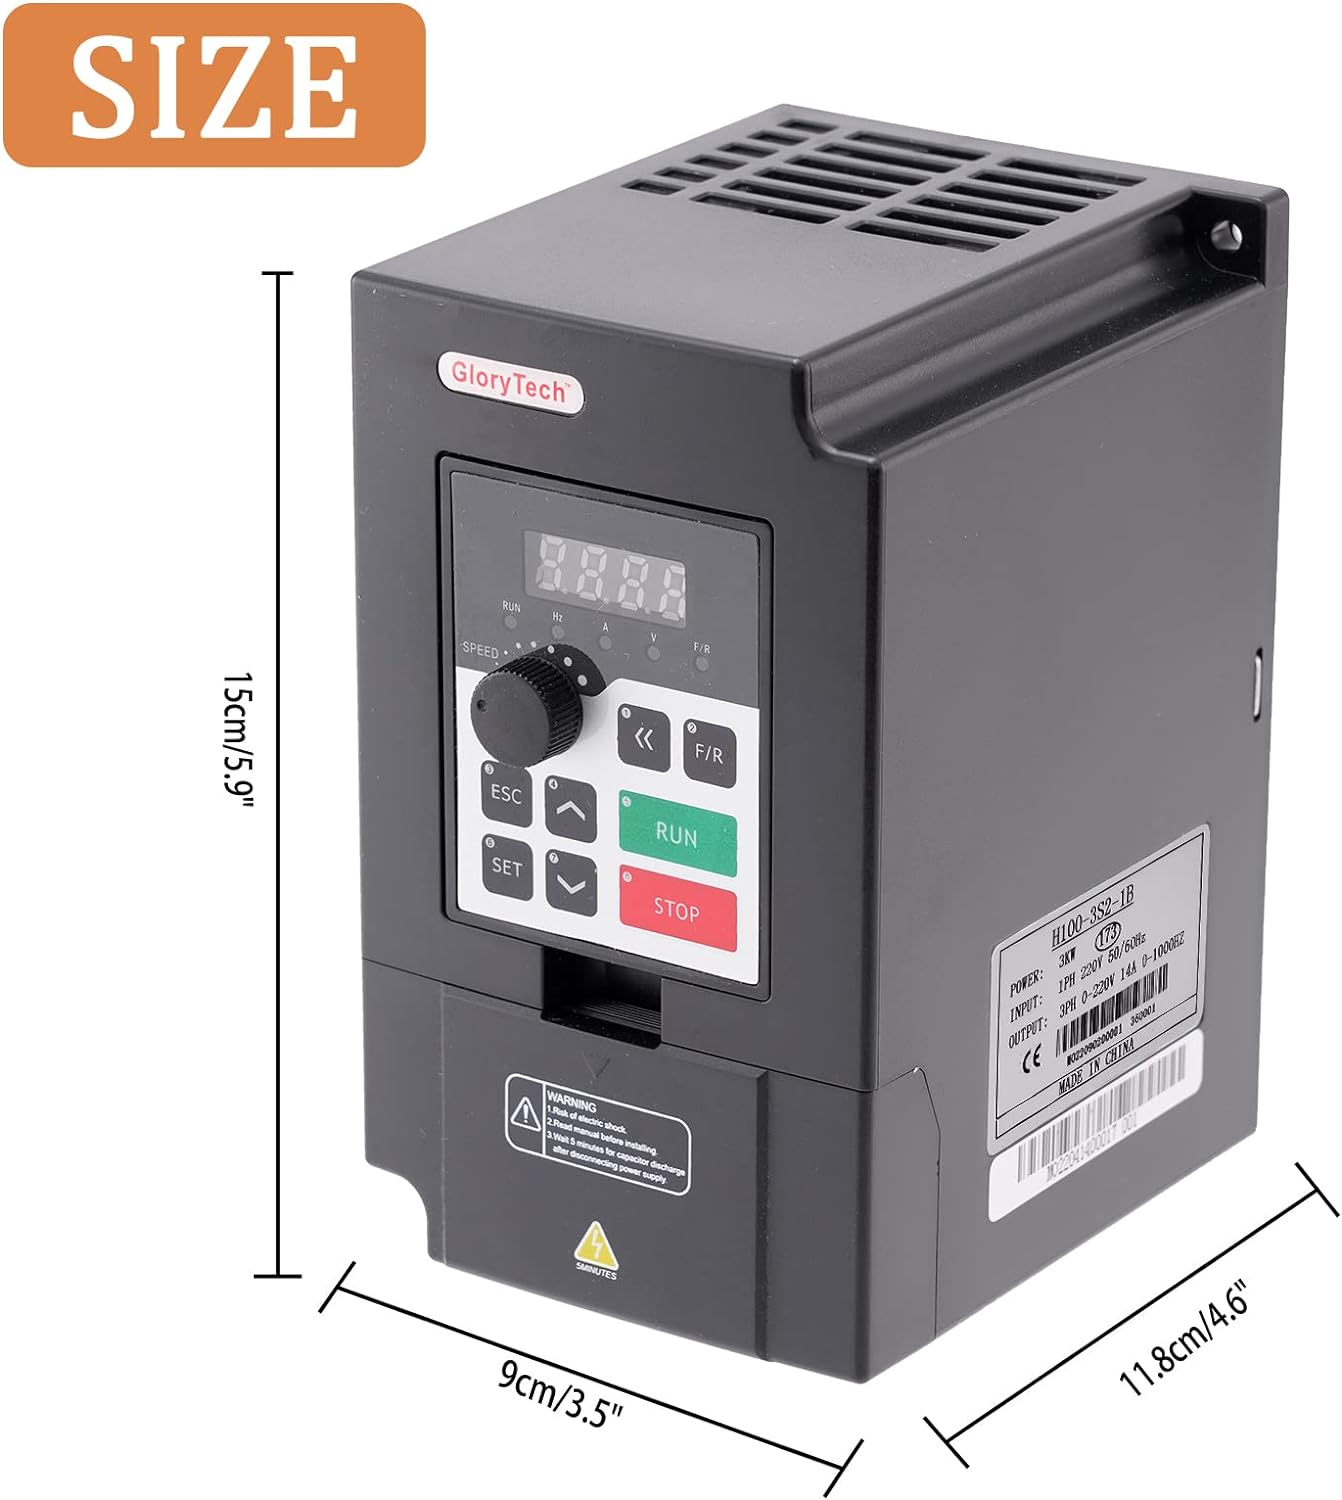 GloryTech VFD 220V 3KW 4HP Variable Frequency Drive,14A VFD Inverter Frequency Converter for CNC Motor Speed Control and Spindle(1 or 3 P